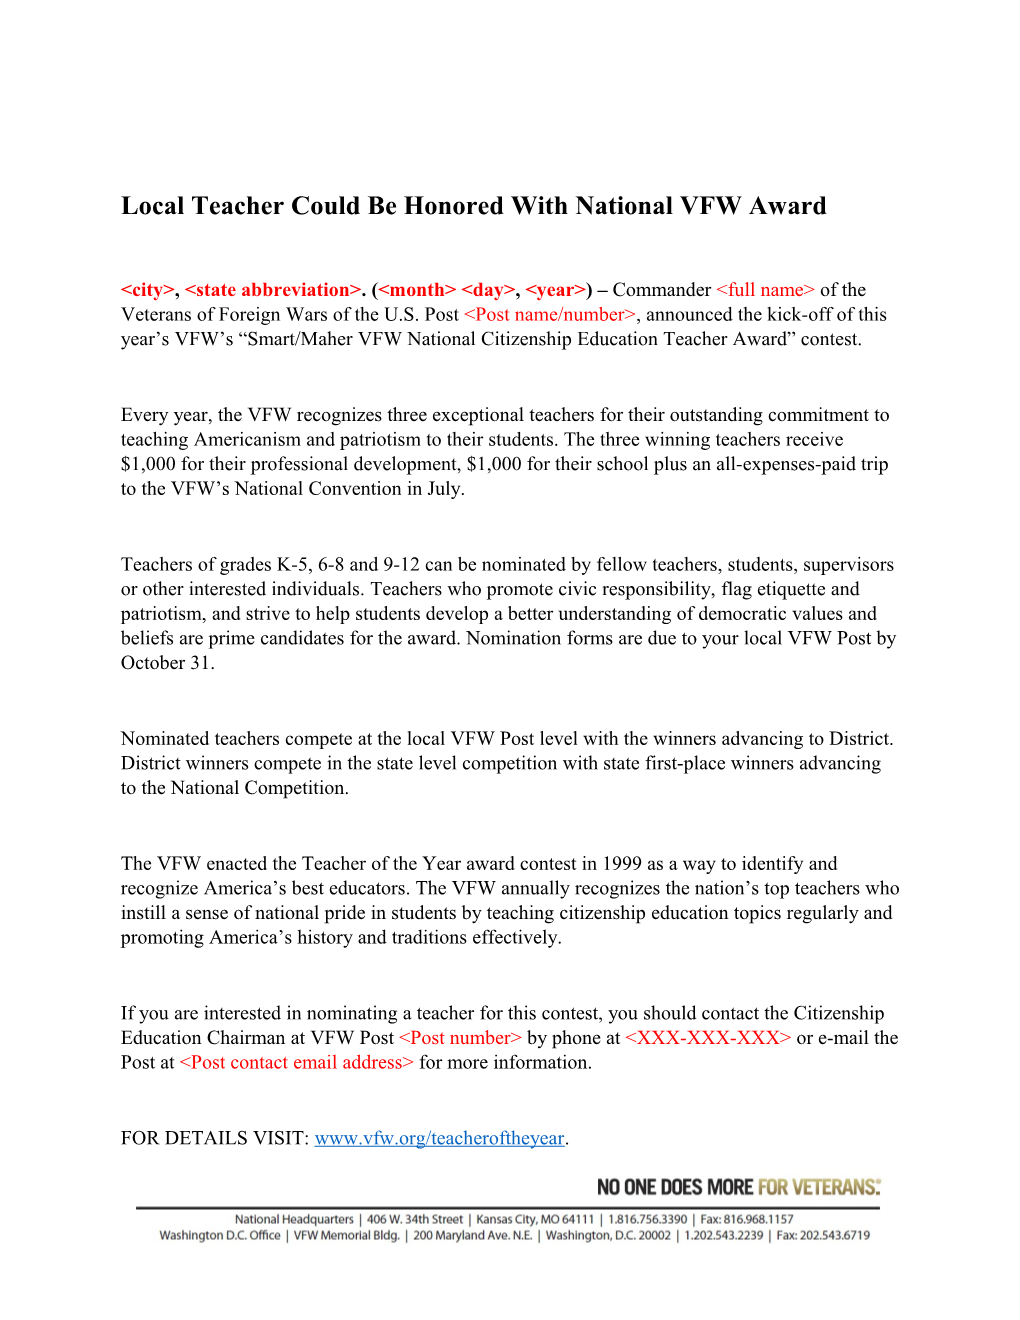 Local Teacher Could Be Honoredwith National VFW Award